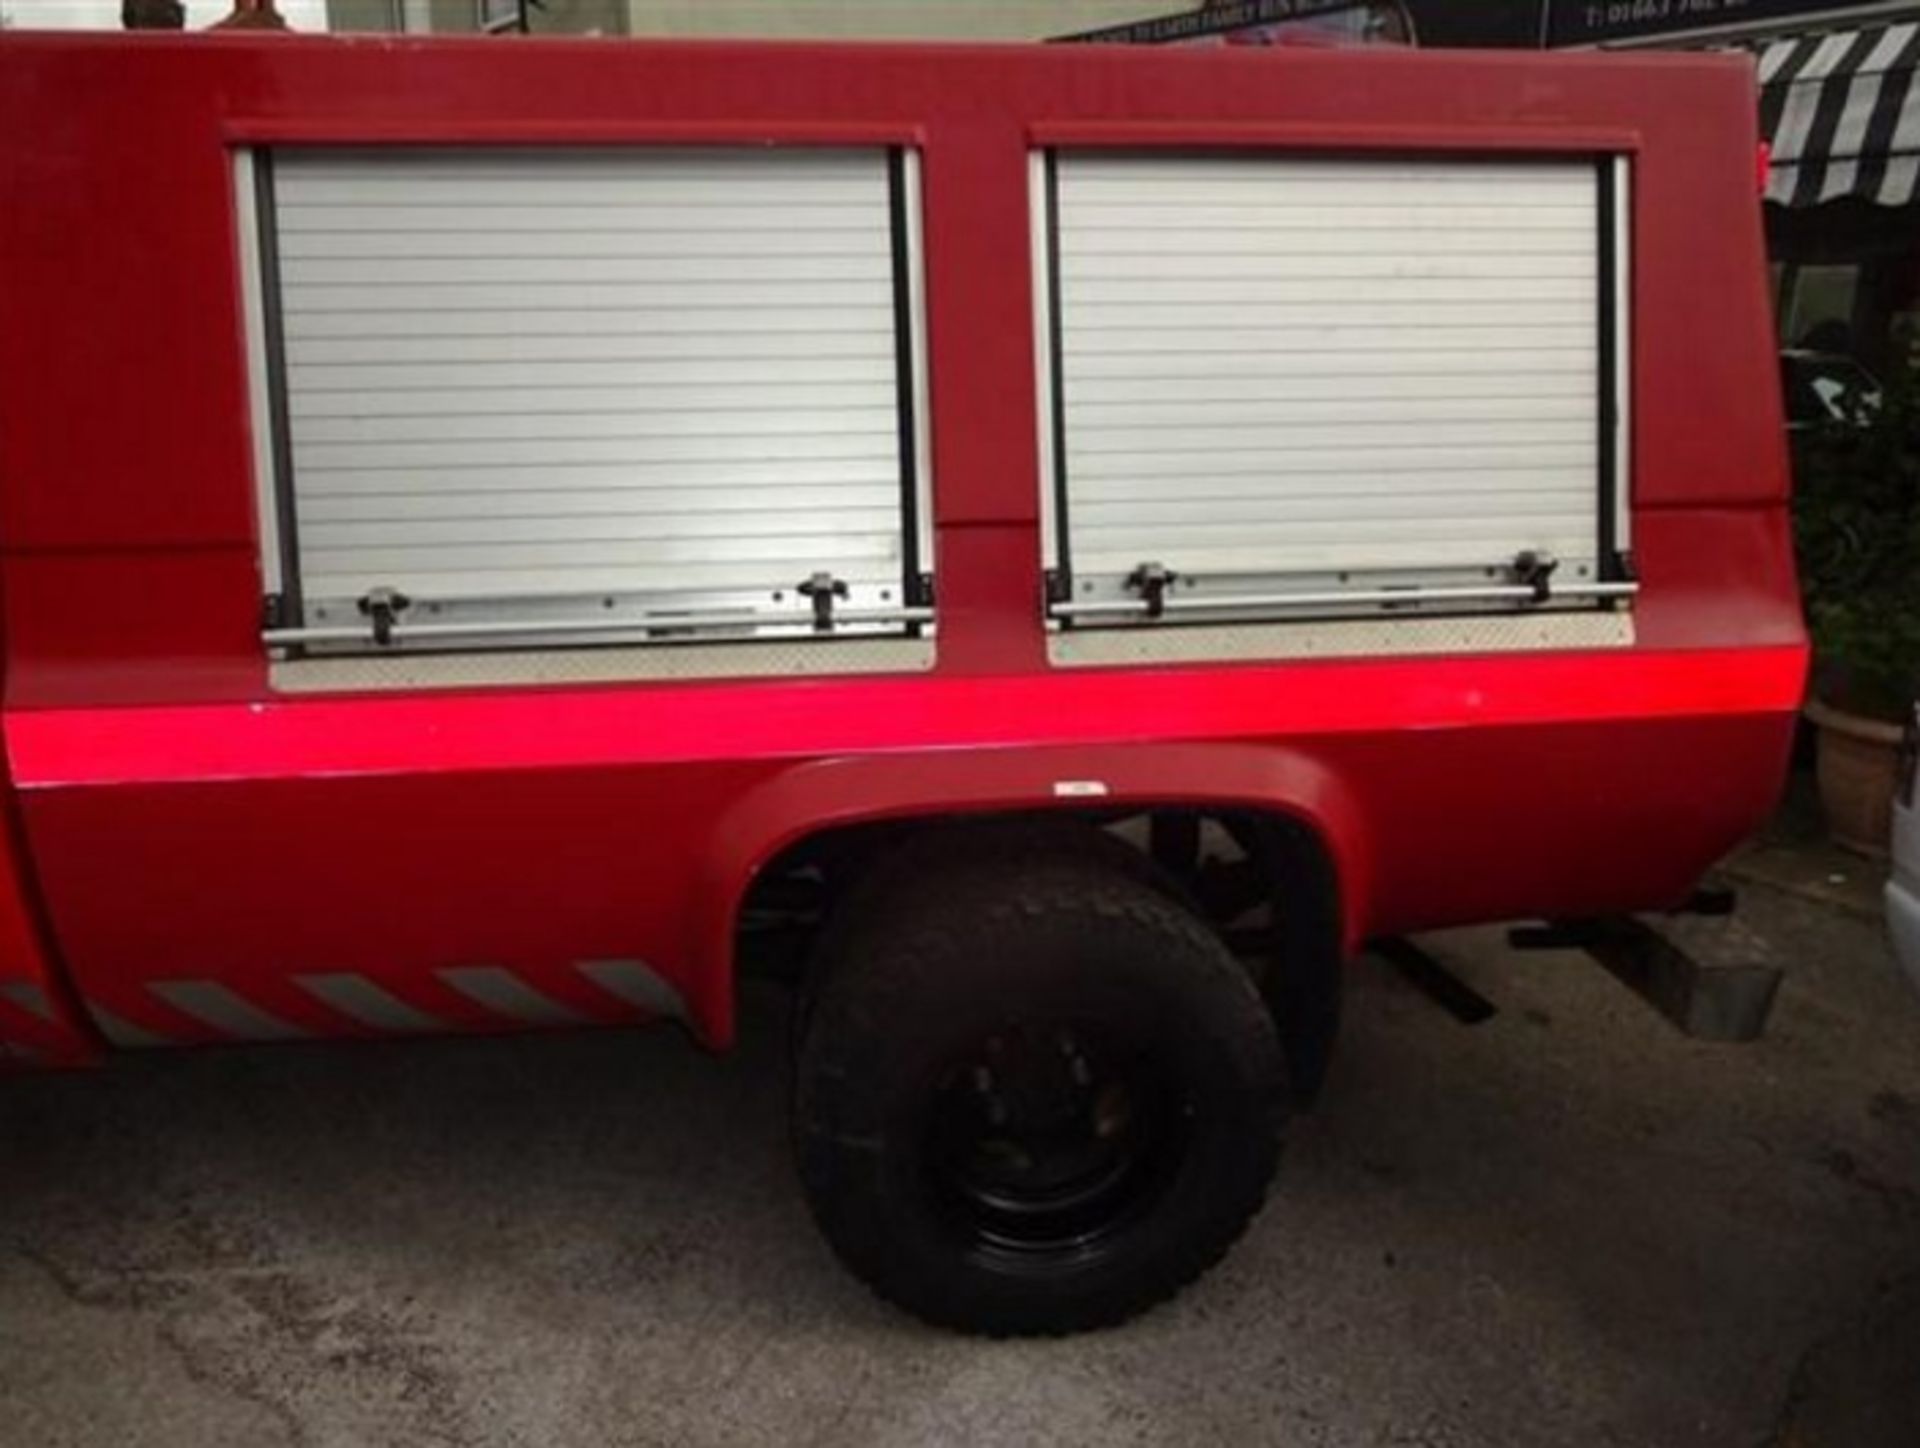 1989 Gmc Chevrolet Fire Truck, 6X6 Diesel 6.2 R.H.D. Auto-Od (Red) - Image 8 of 24